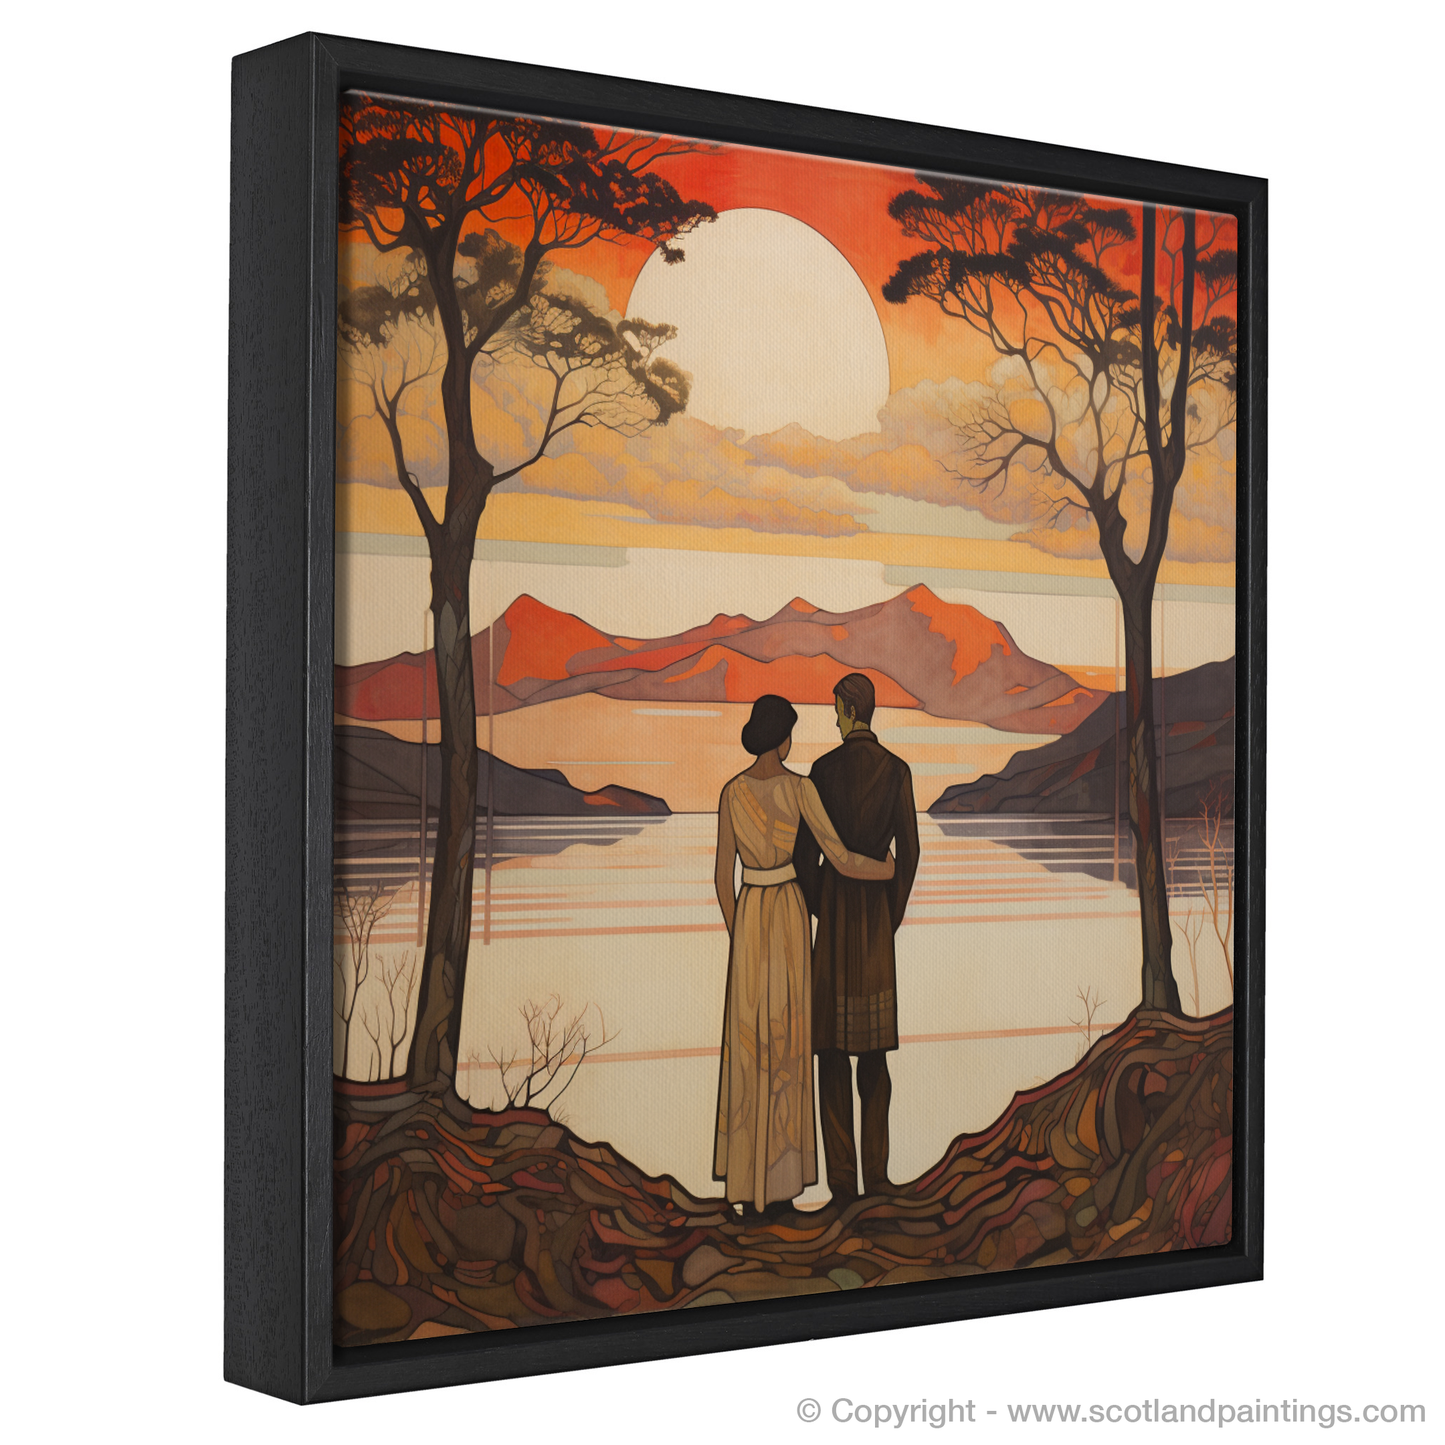 Painting and Art Print of A couple holding hands looking out on Loch Lomond entitled "Embrace at Dusk: A Loch Lomond Idyll".